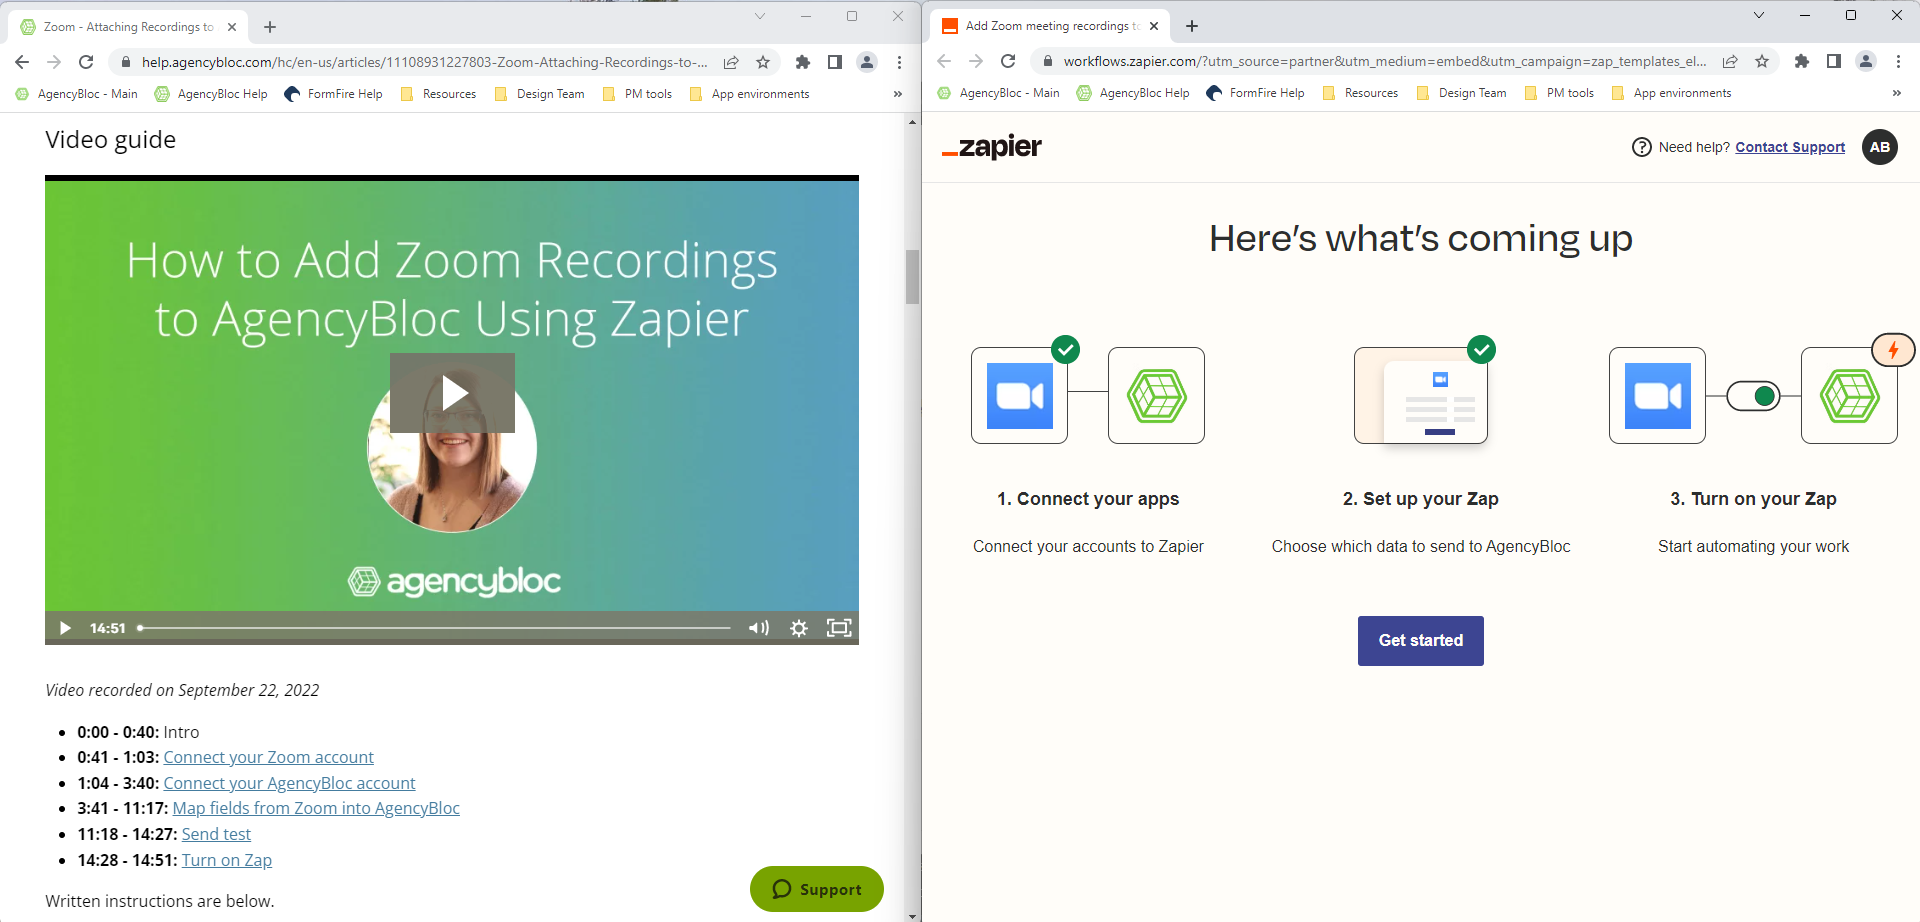 Screenshot showing the Help article in one window and the Zapier website in another side by side